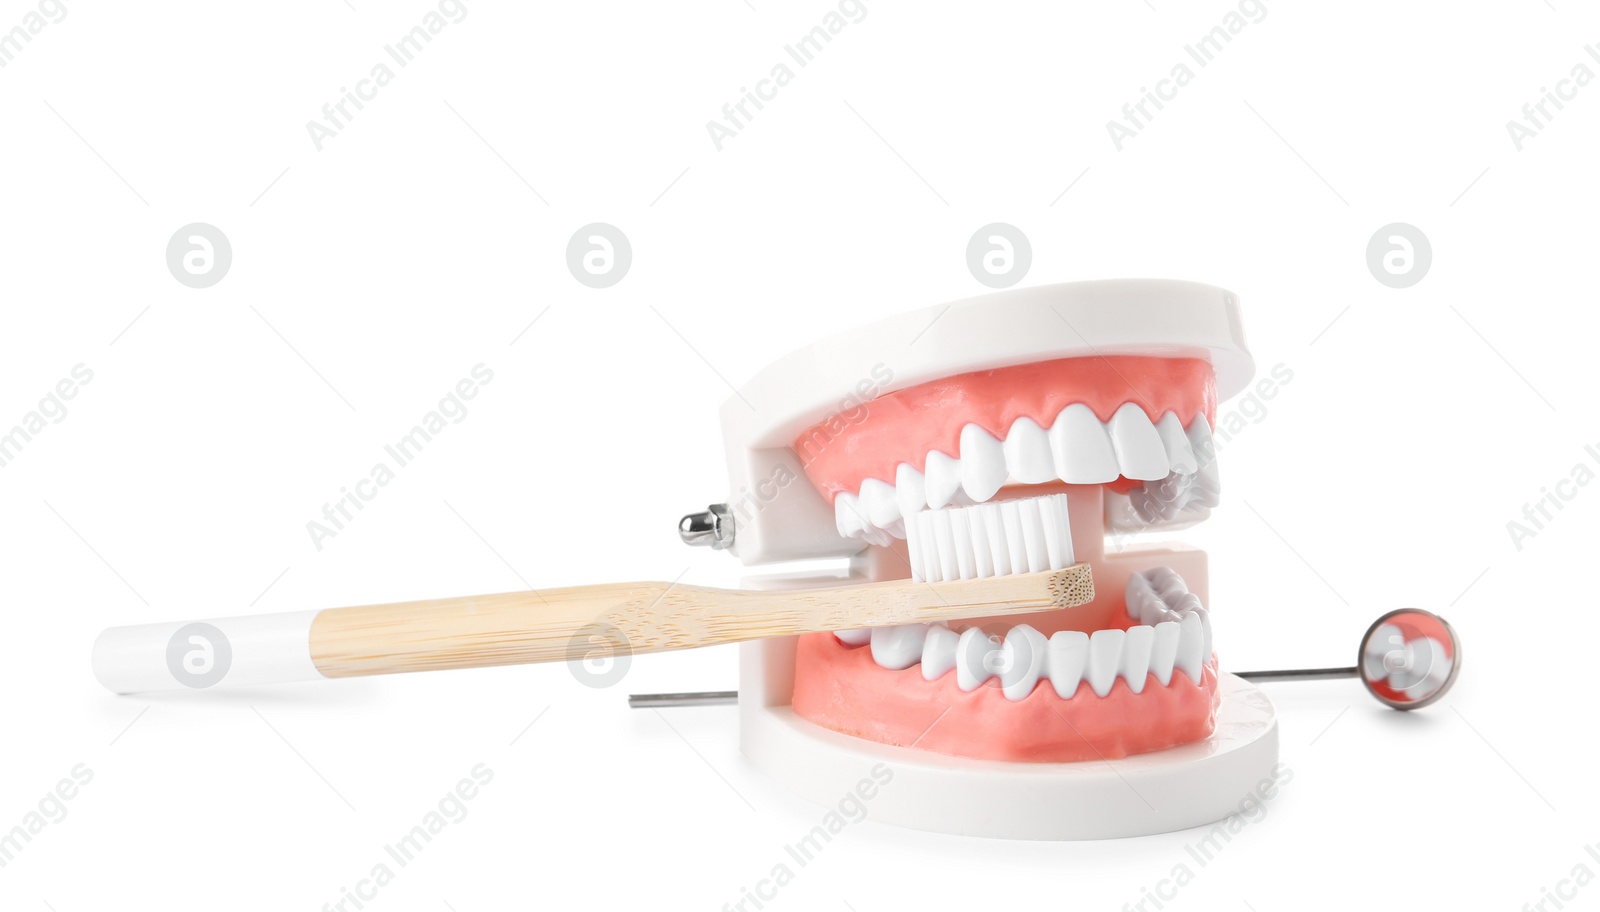 Photo of Educational model of oral cavity with teeth, brush and mouth mirror on white background